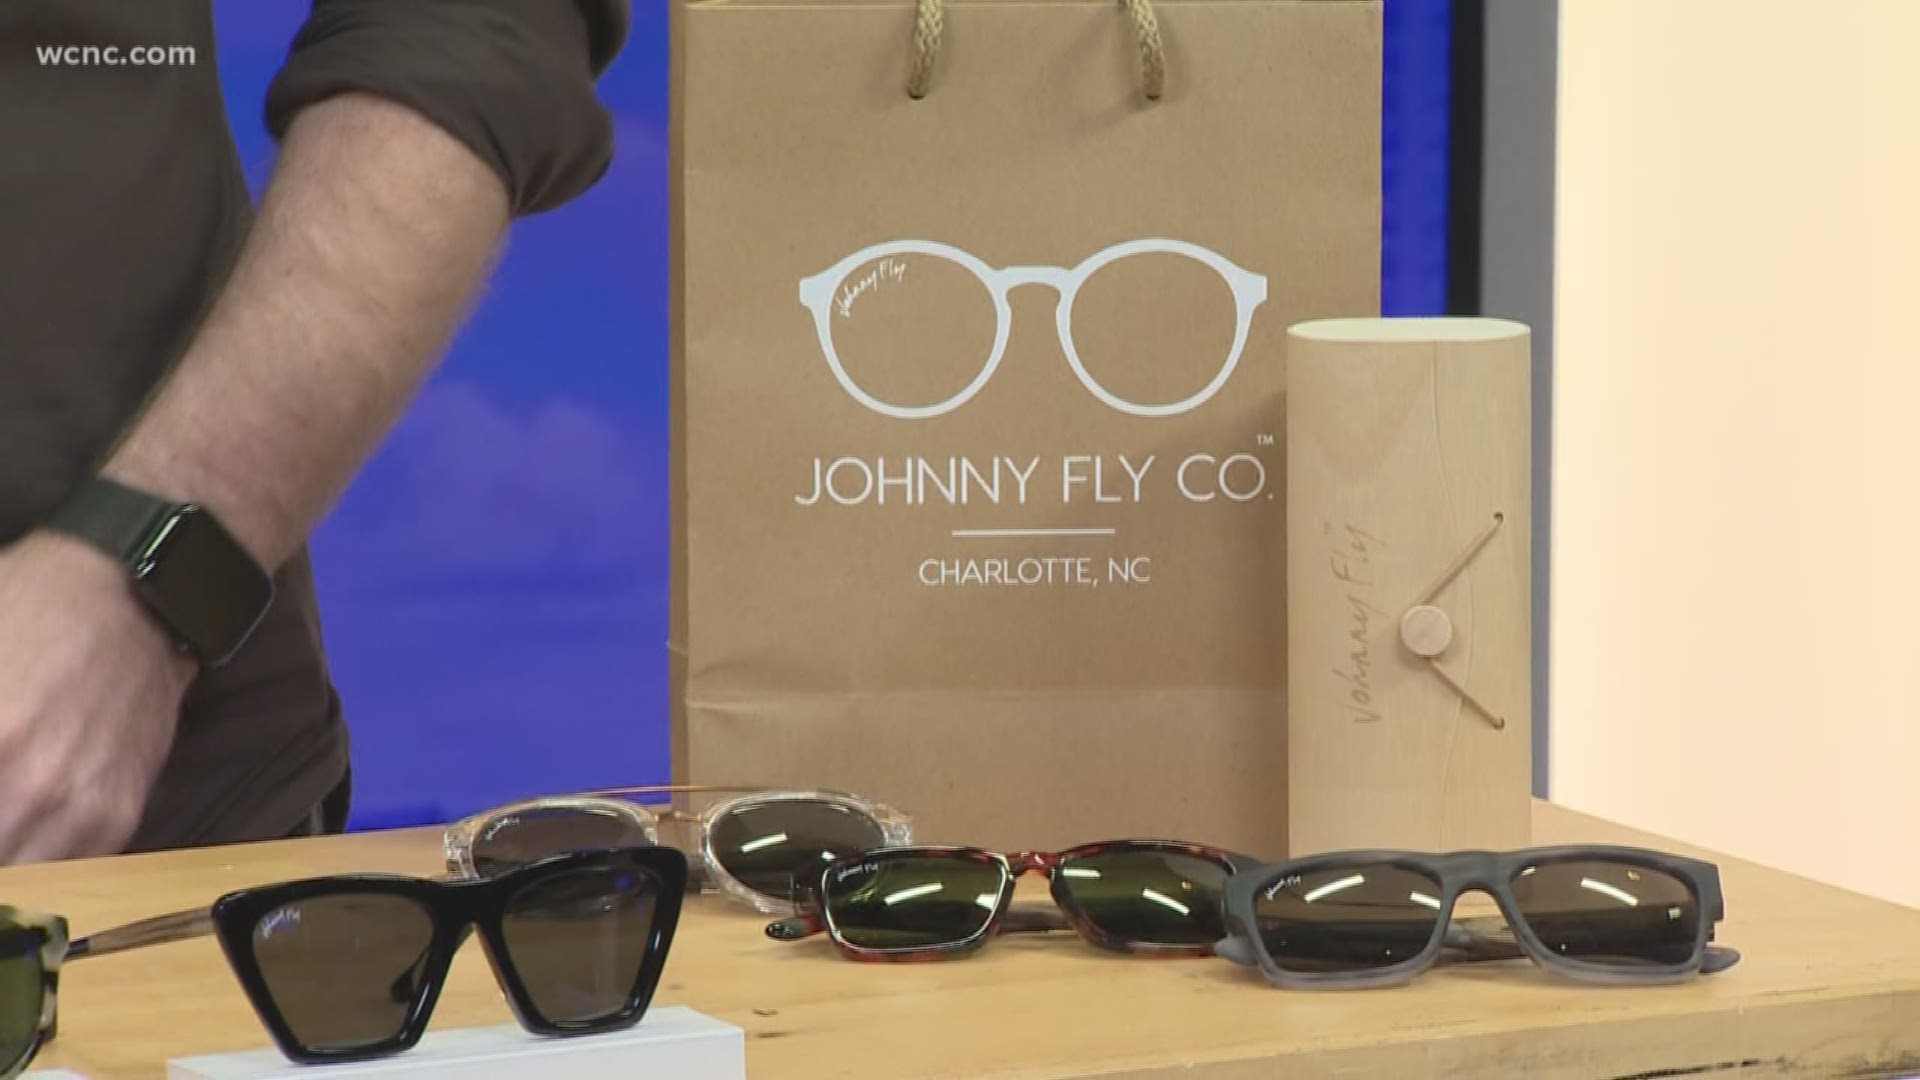 Johnny Fly Co designs and creates sunglasses right here in Charlotte. Owner John Freeman shares his favorite styles for summer.